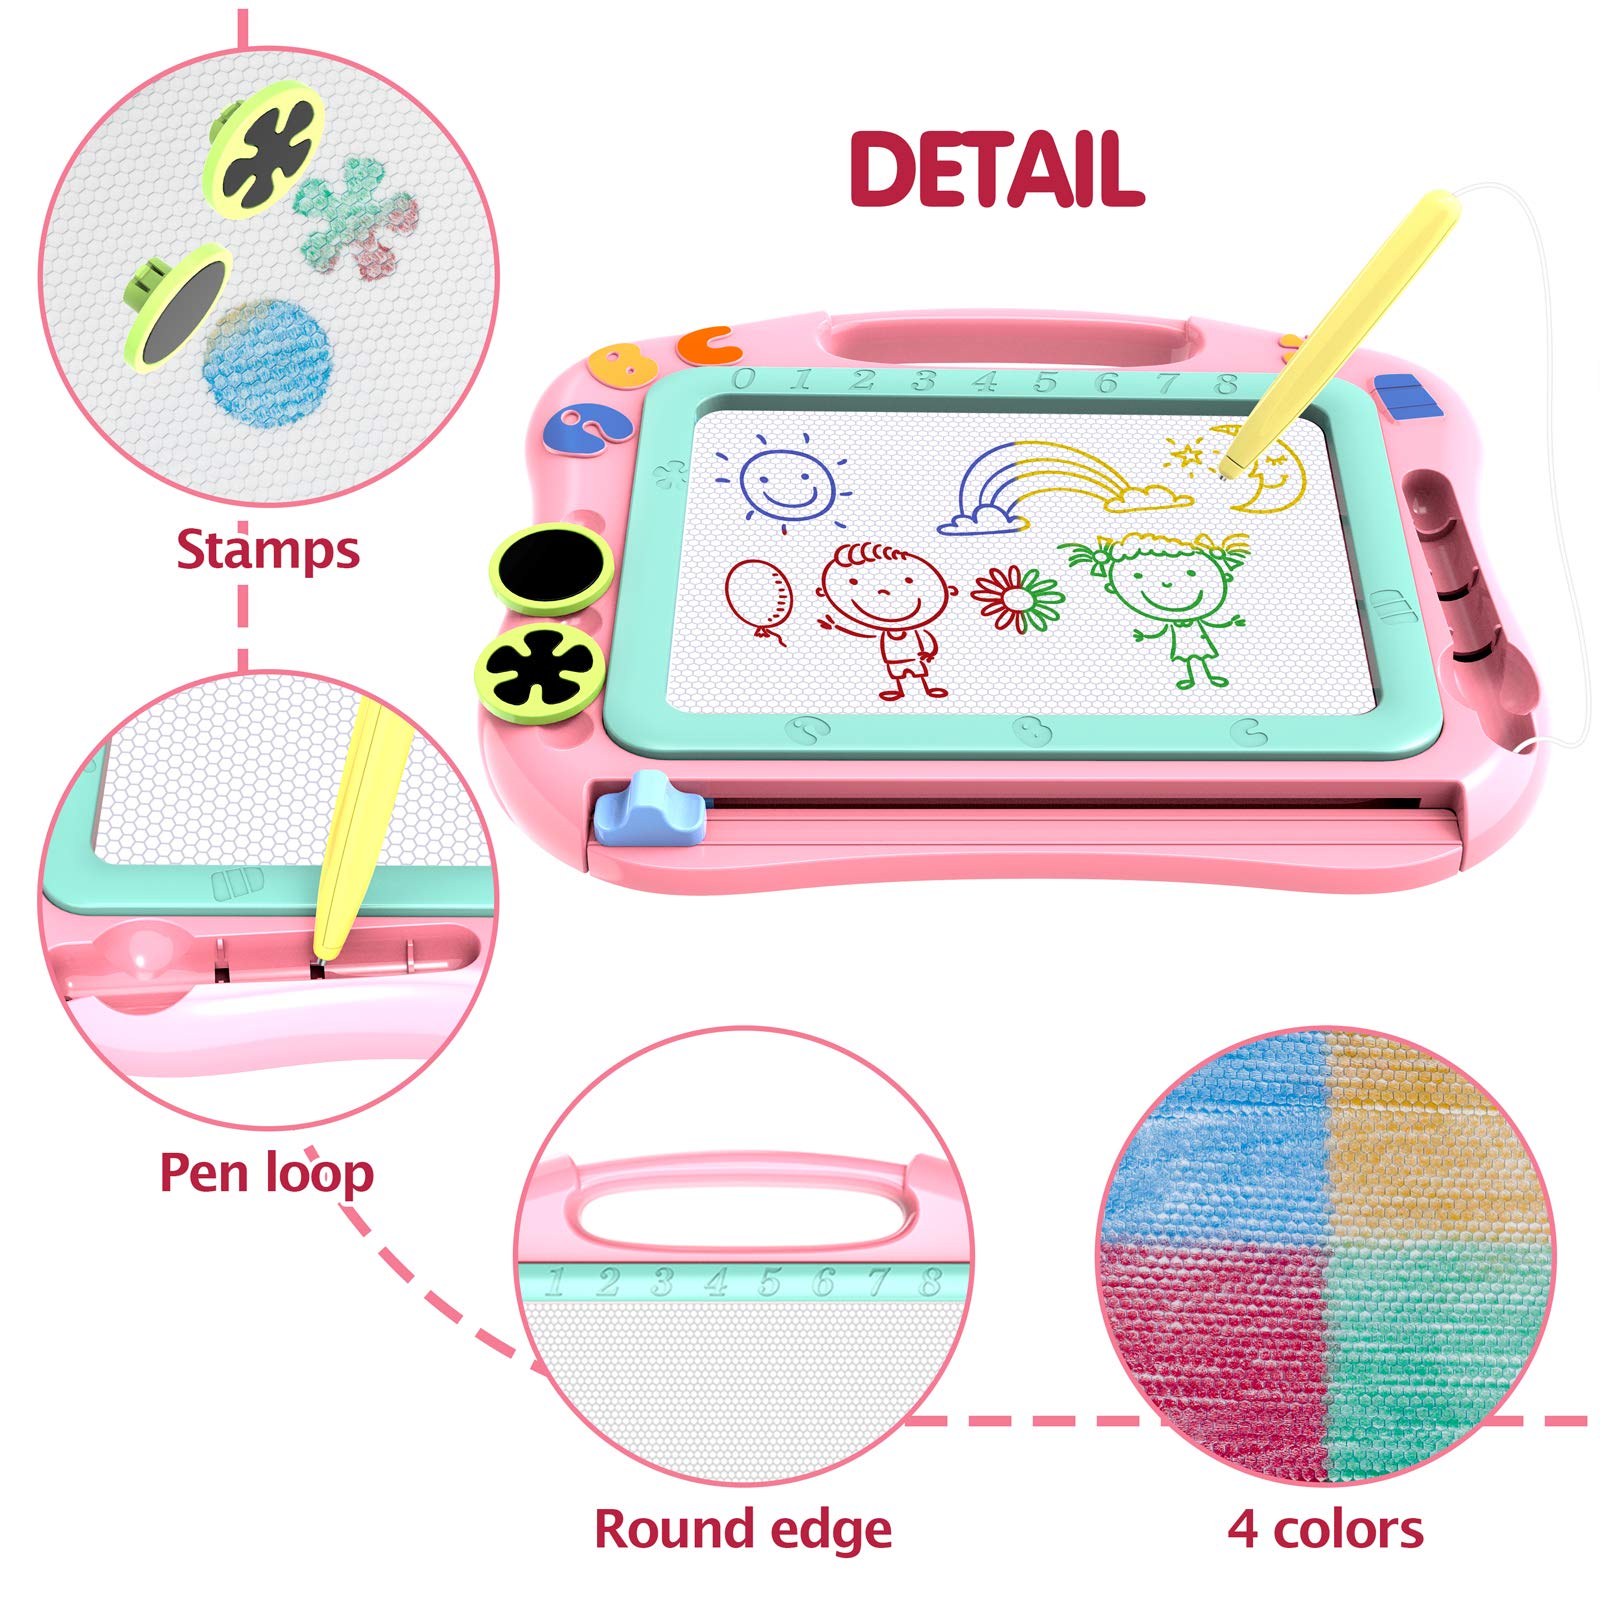 LOFEE Magna Drawing Doodle Board Present for 1 2 3 4 Year Old Girl,Magnetic Drawing Board Gift for 2 3 4 Year Old Girl Toy Age 1 2 3 Birthday Gift for 2 3 4 Year Old Girls Small Toys for Travel SLHFPX